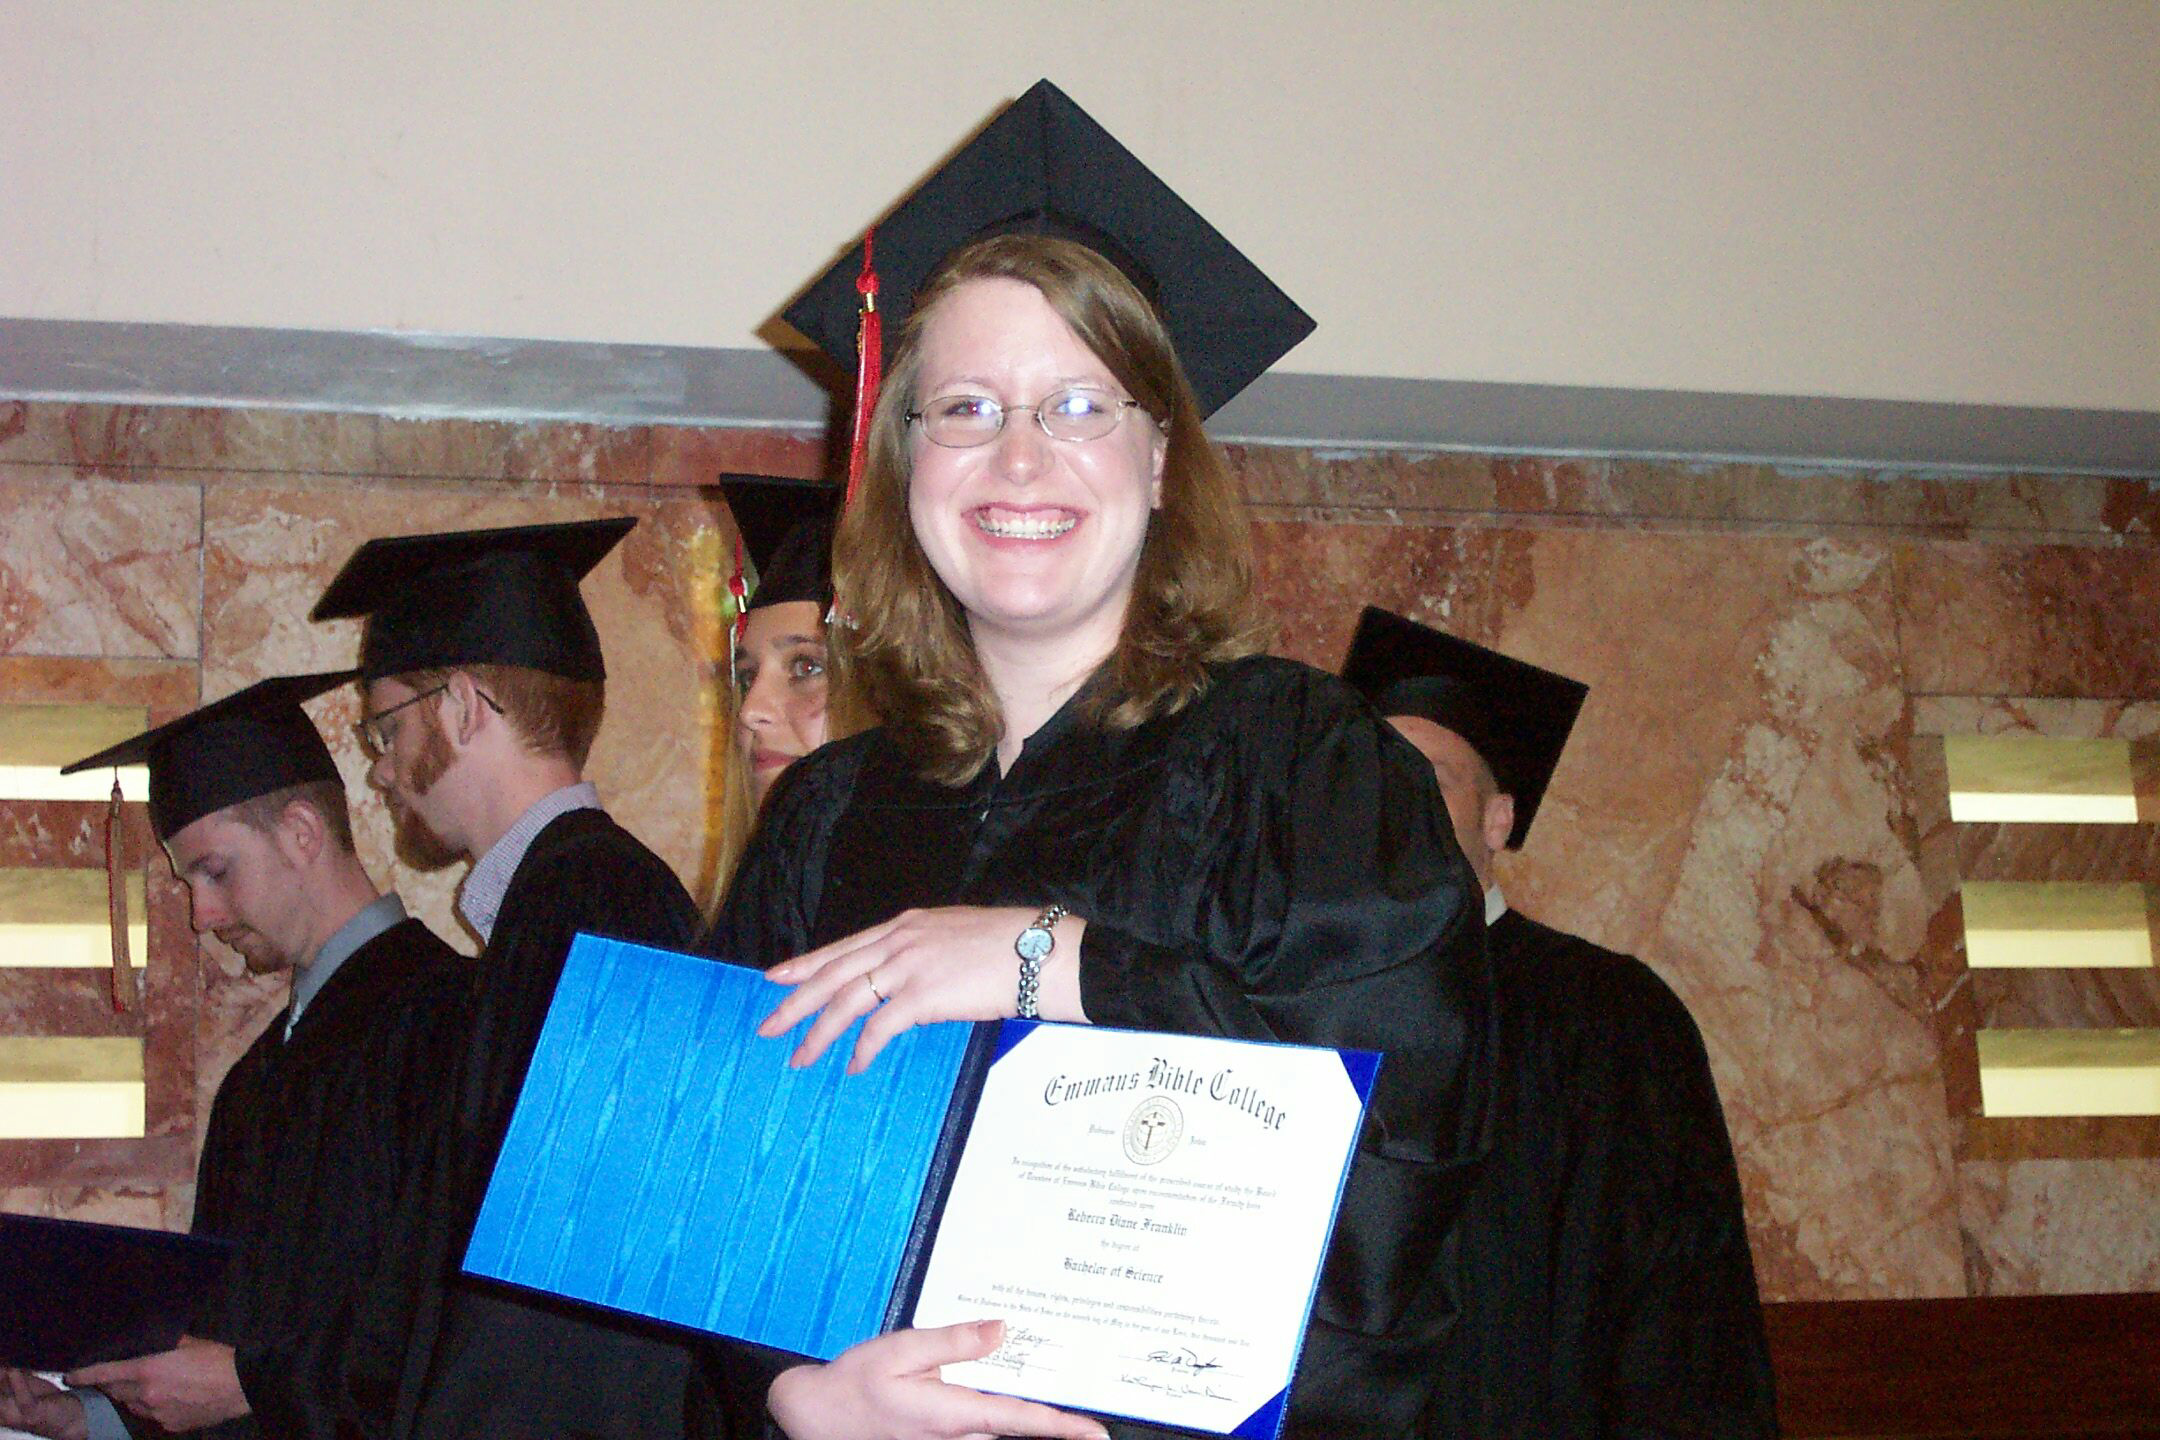 After receiving her diploma